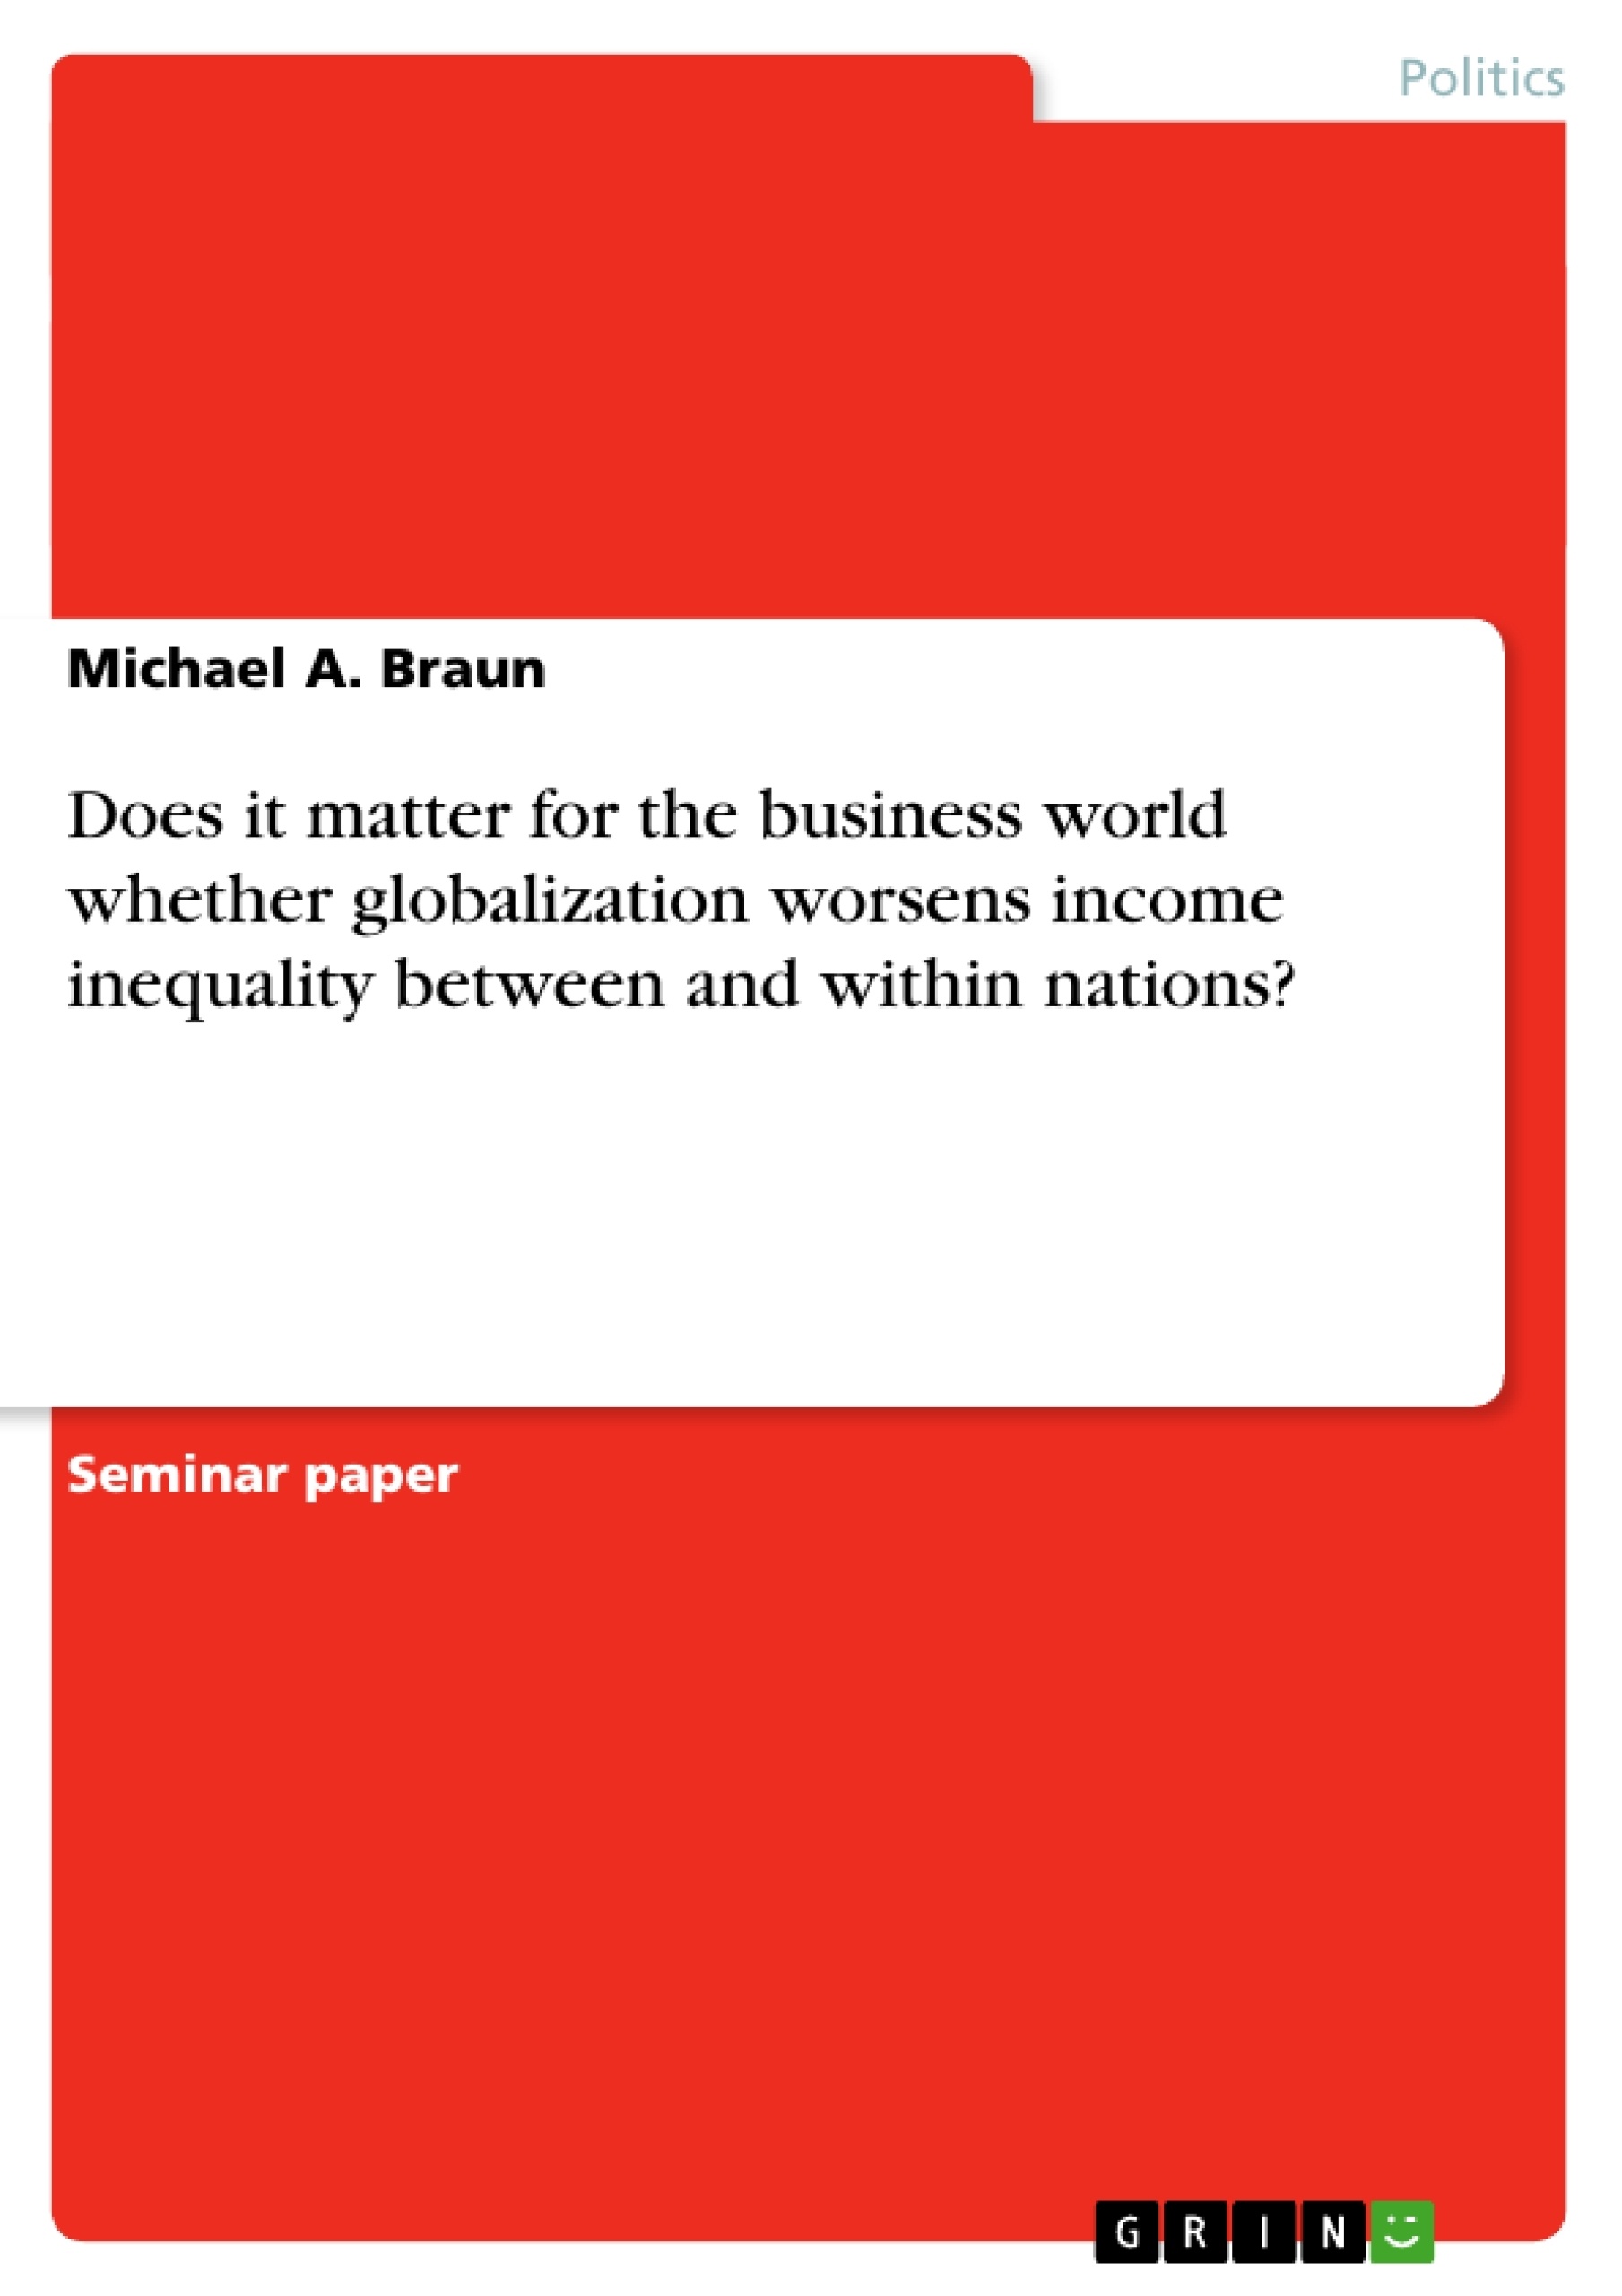 Title: Does it matter for the business world whether globalization worsens income inequality between and within nations?